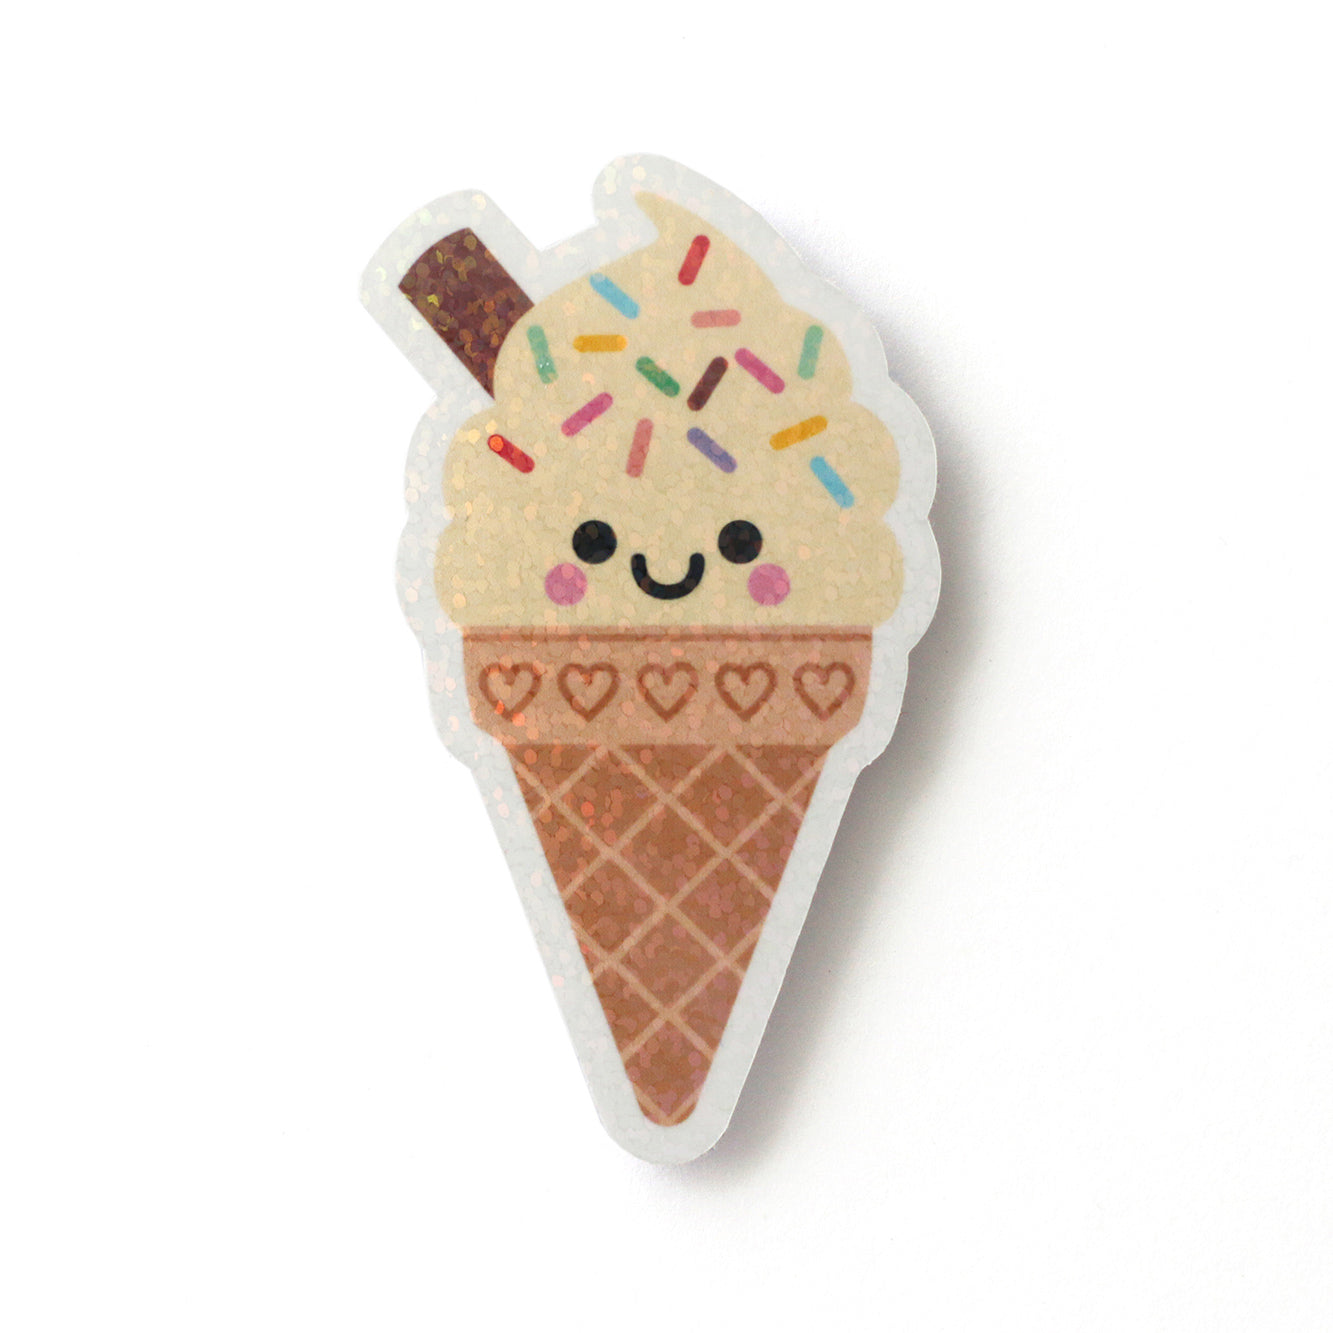 Cute Vanilla Ice Cream cone with Rainbow Sprinkles, a happy face and a chocolate flake